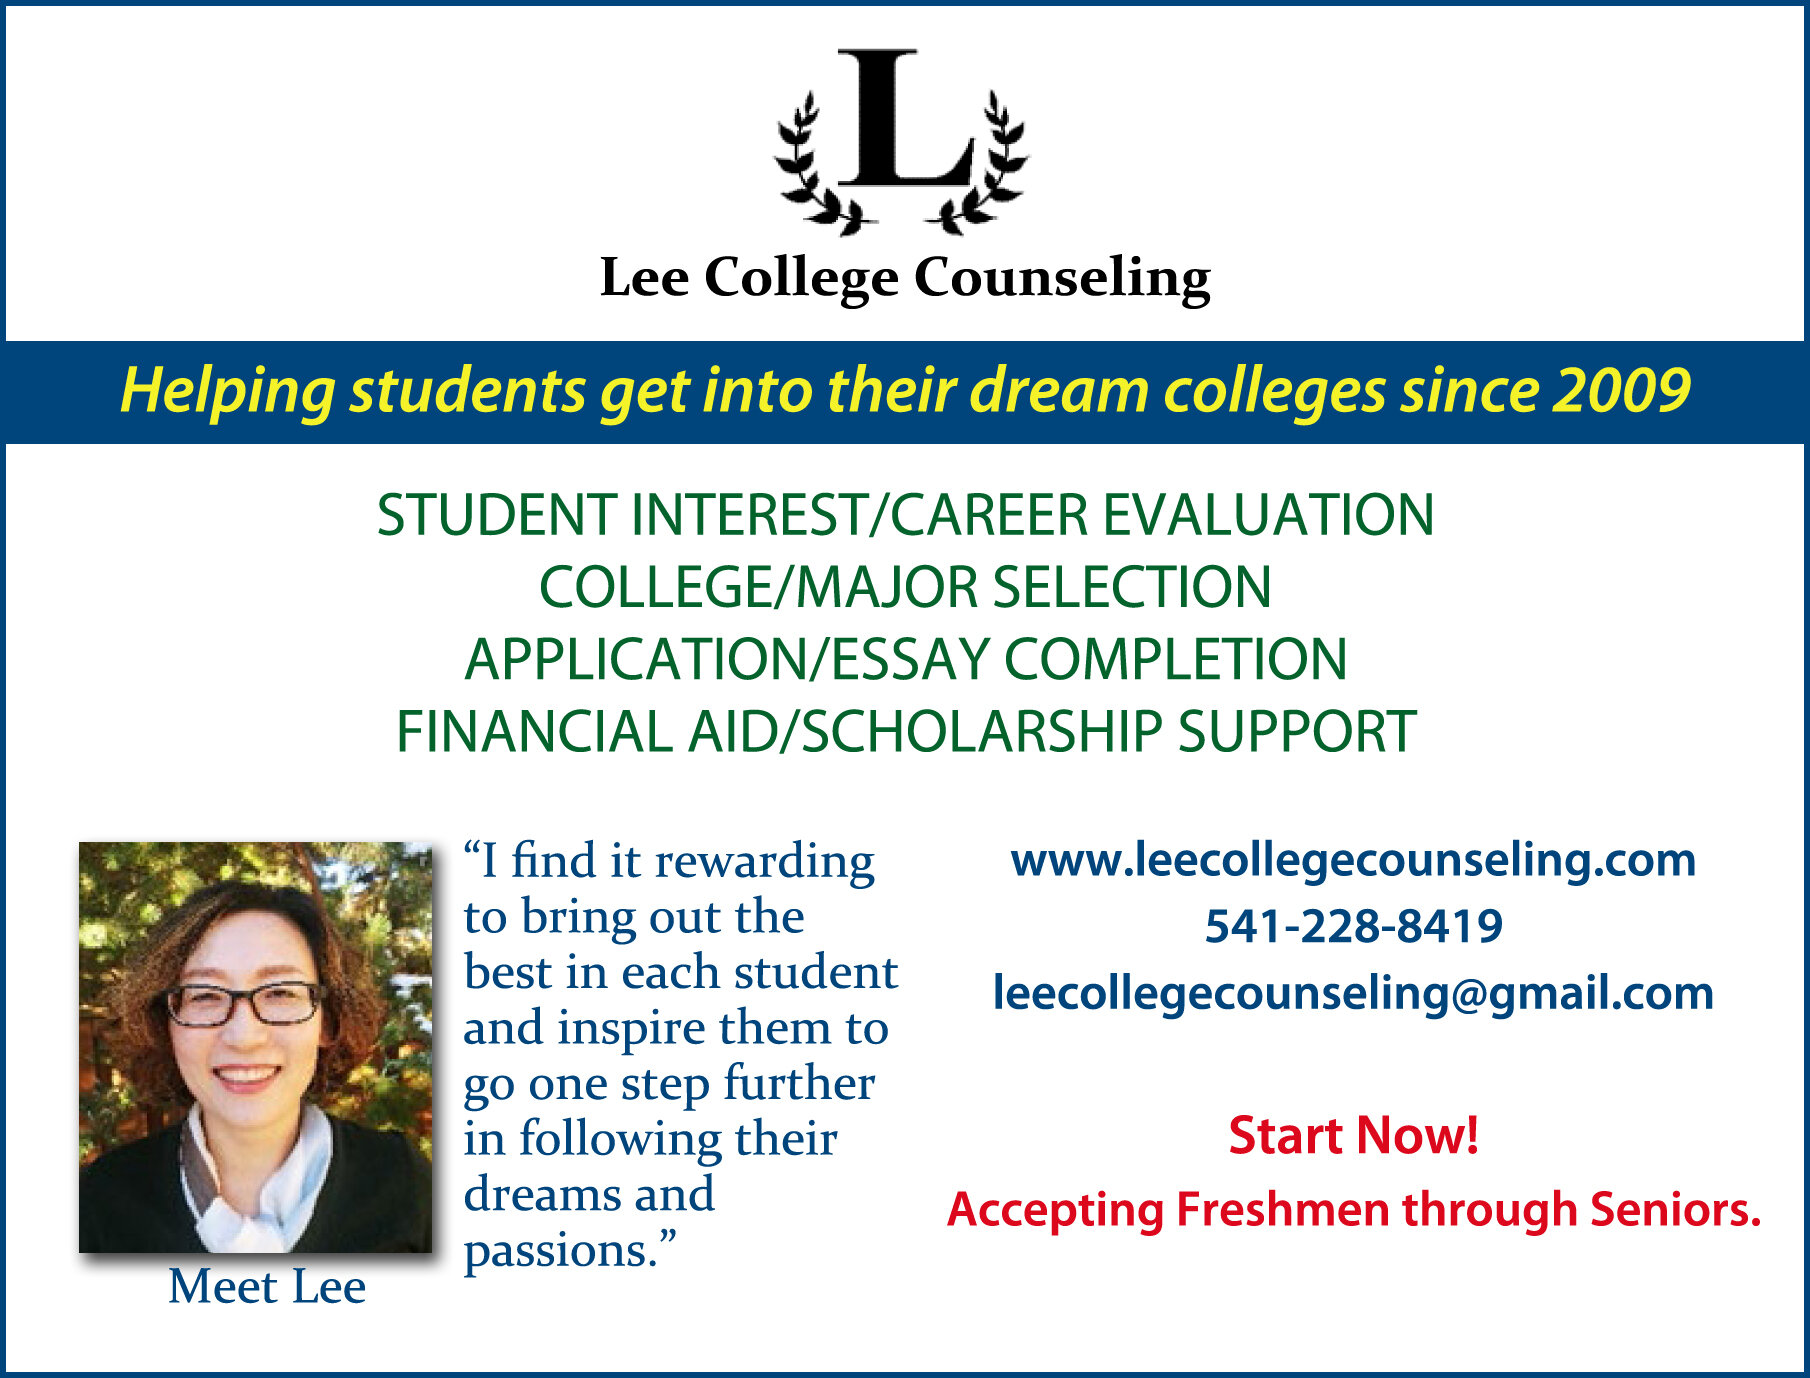 Lee College Counseling ad for approval.jpg